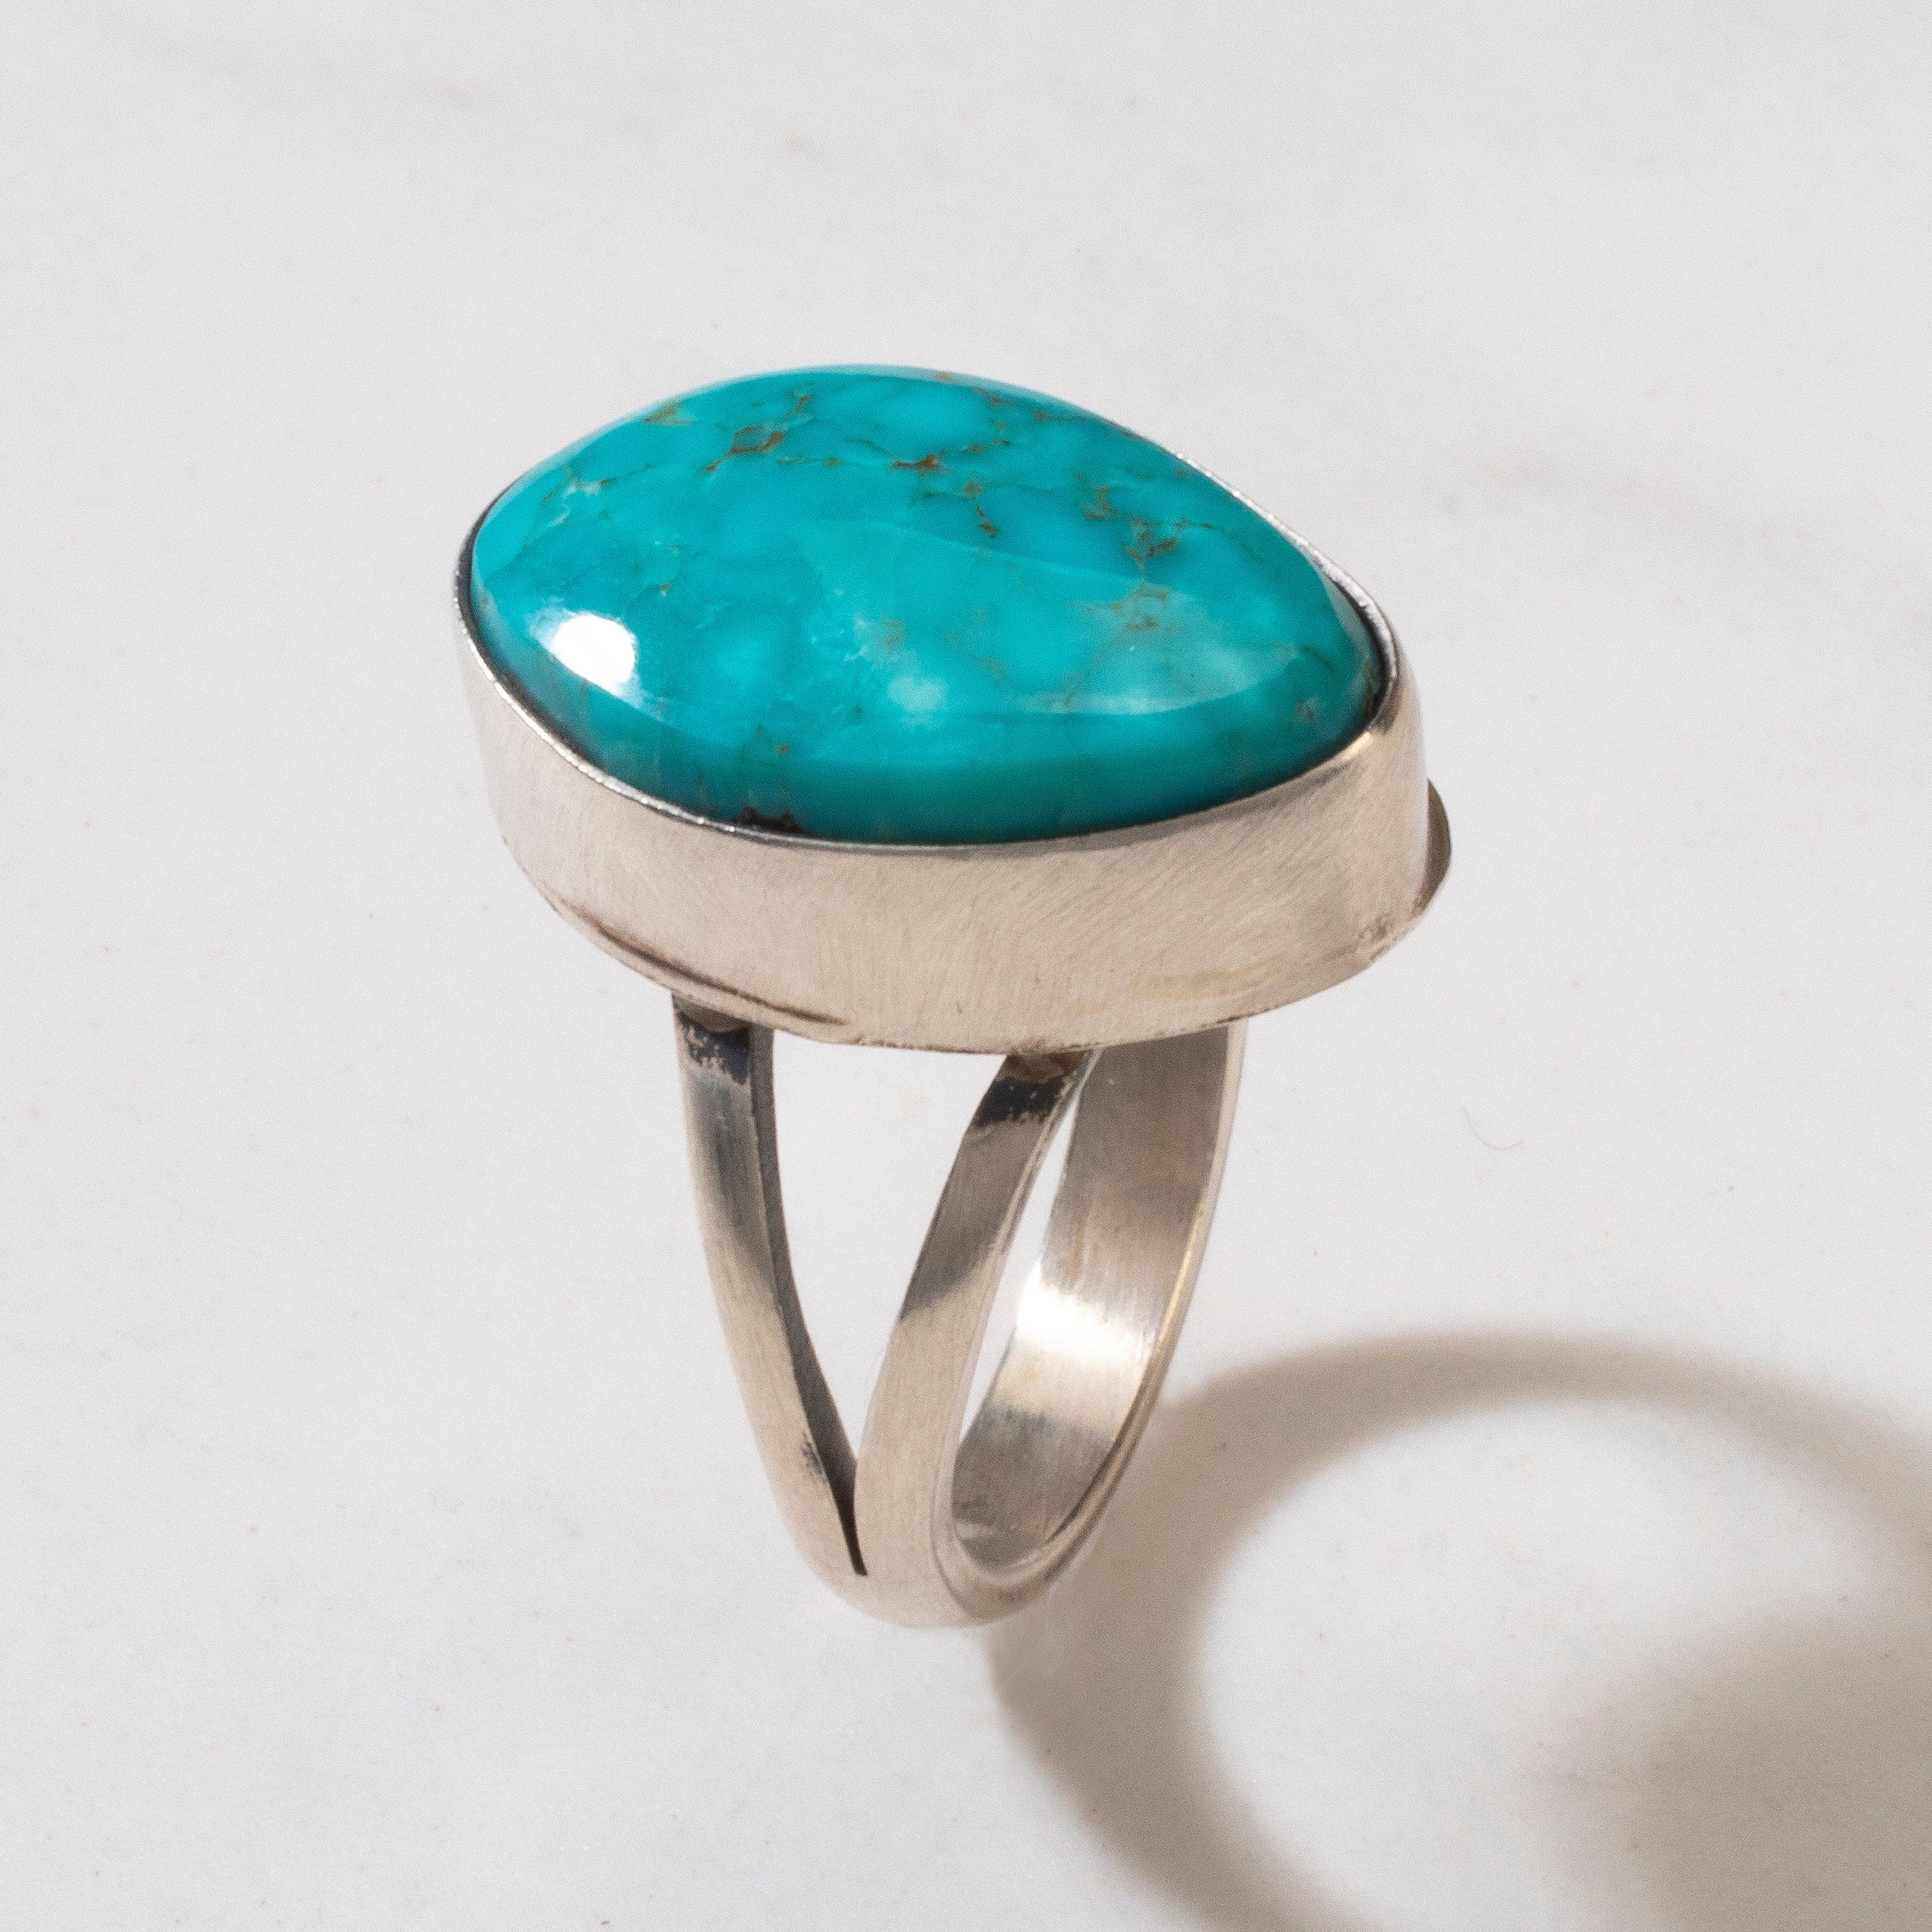 Kalifano Native American Jewelry 6 Scott Skeets Blue Ridge Turquoise USA Native American Made 925 Sterling Silver Ring NAR600.049.6